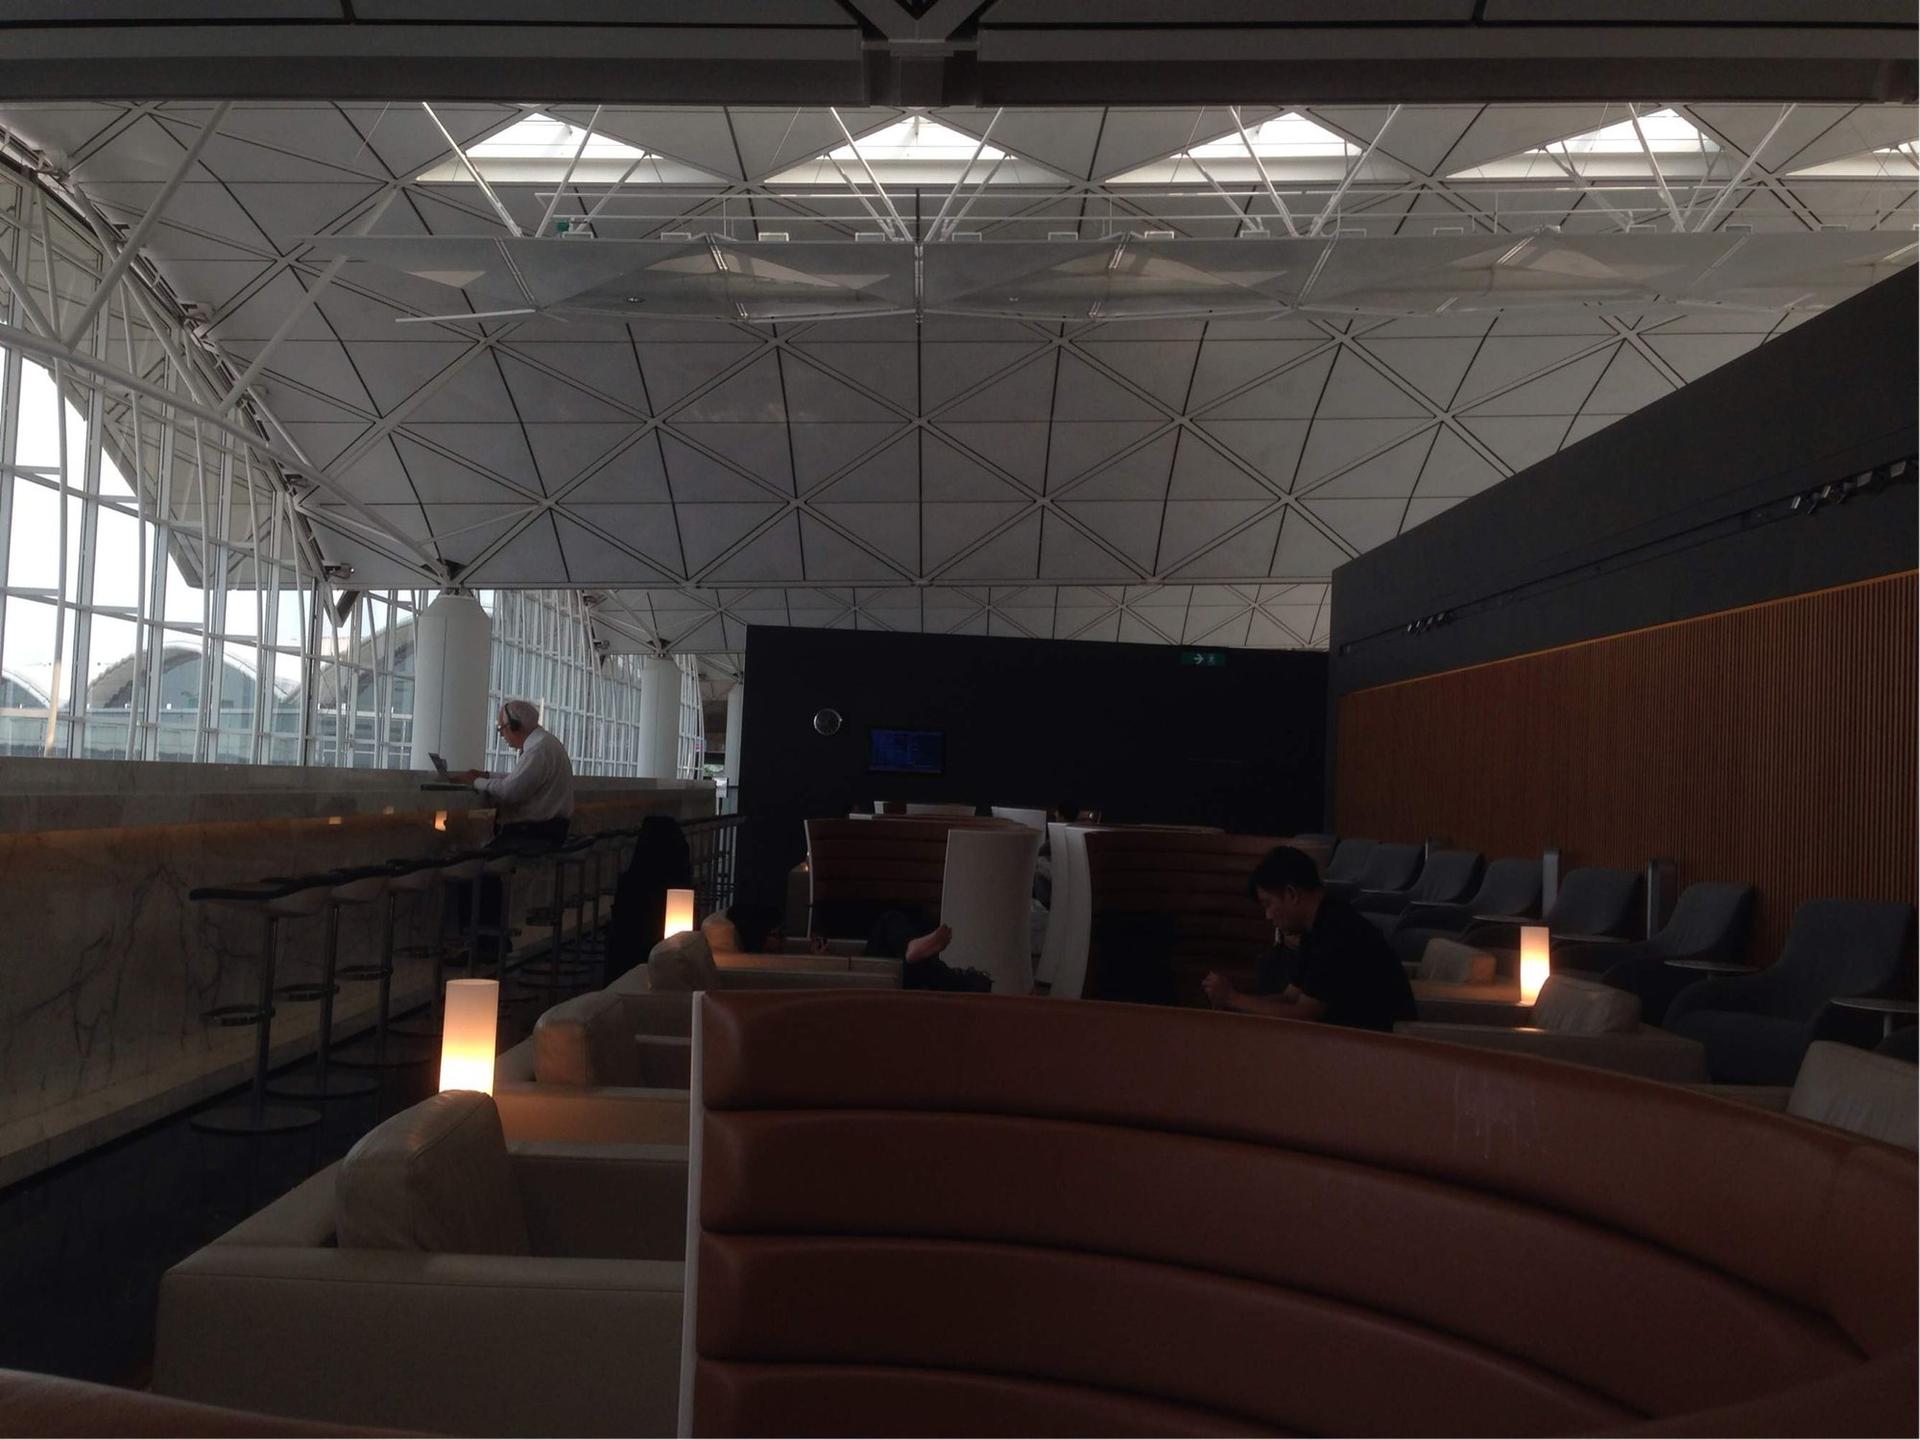 Cathay Pacific The Wing First Class Lounge image 36 of 89